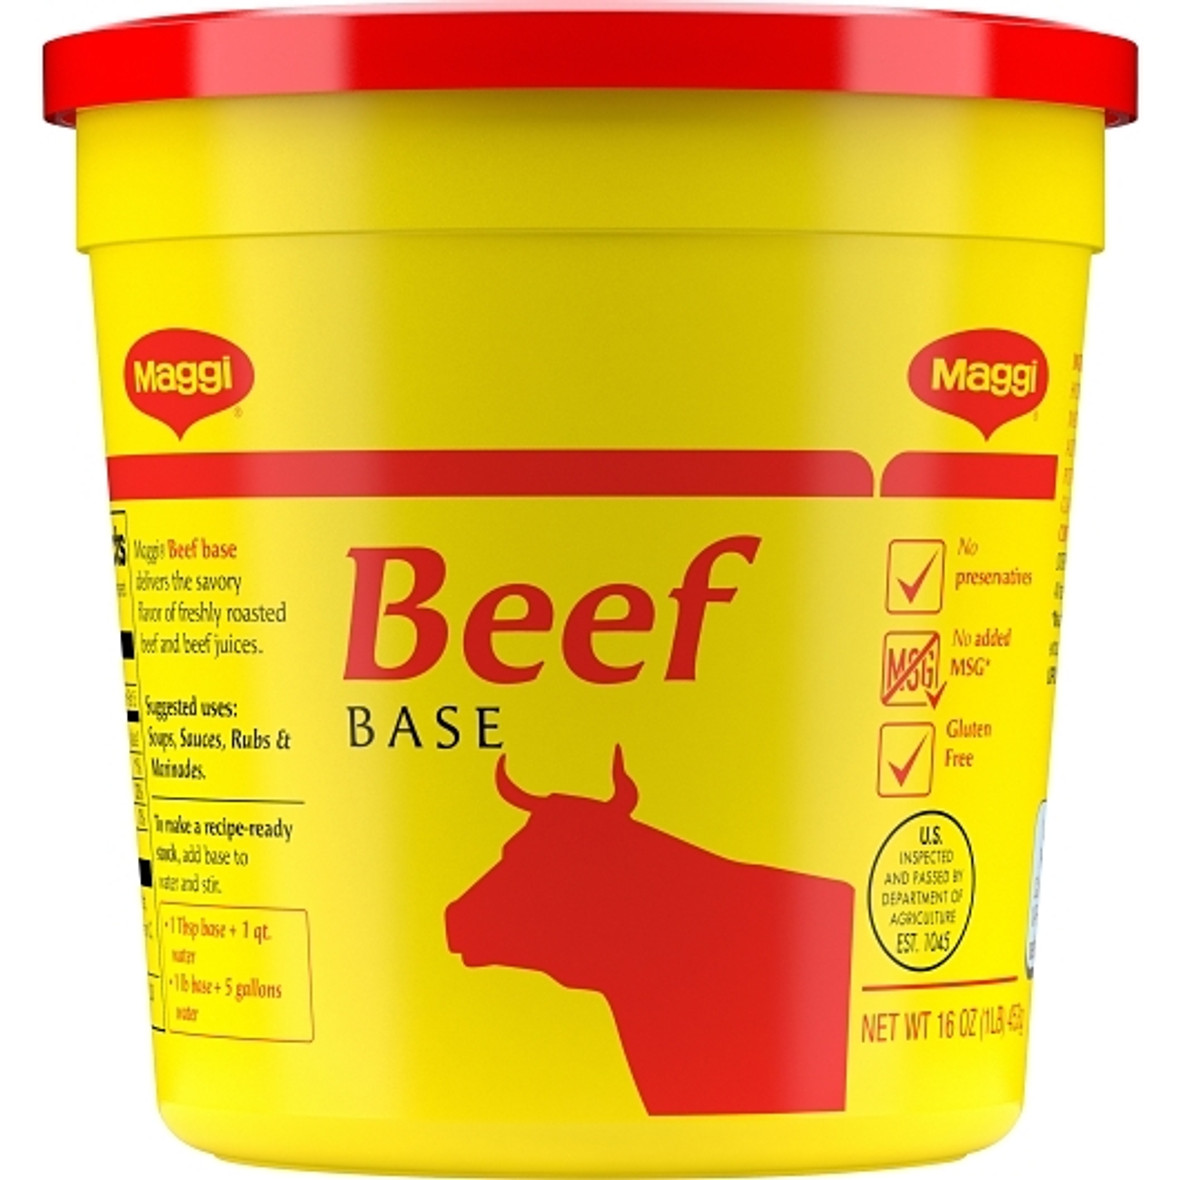 Maggi Beef Base (No Added MSG) Gluten Free, 1 Pound, Pack of 6